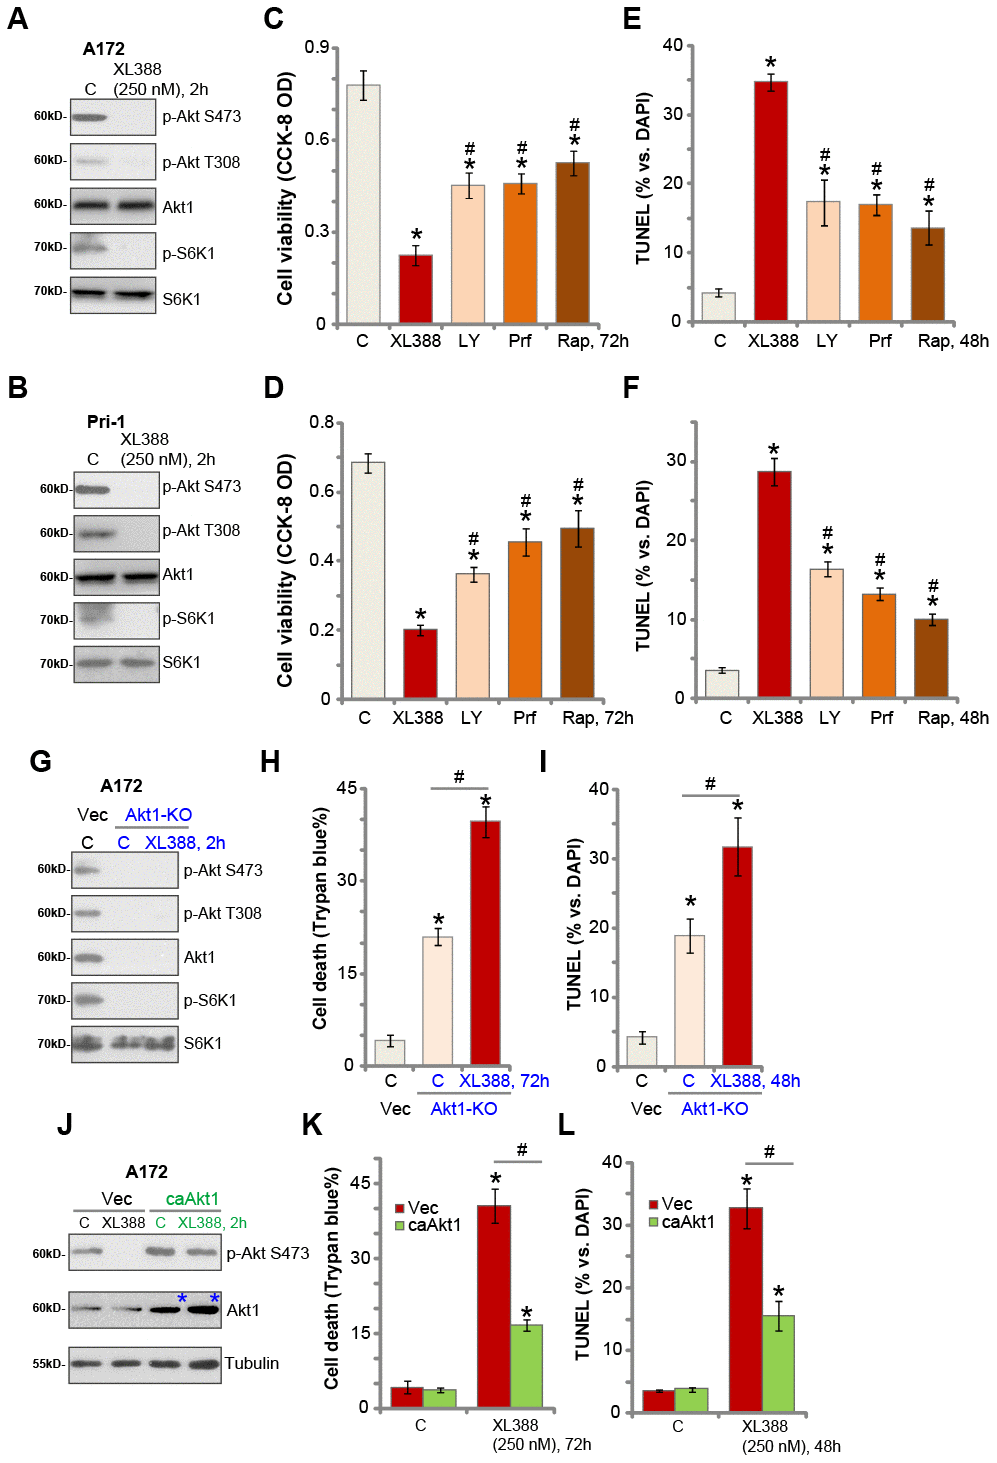 XL388-induced anti-glioma cell activity is through Akt-mTOR-dependent and -independent mechanisms. A172 cells or the primary human glioma cells, Pri-1, were treated with XL388 (250 nM), and cultured for 2h, and expression of listed proteins was shown (A and B). A172 cells or the Pri-1 primary human glioma cells were treated with XL388 (250 nM), LY294002 (“LY”, 1 μM), perifosine (“Prf”, 5 μM) or rapamycin (“Rap”, 500 nM) for 48-72h, then cell viability and apoptosis were tested by CCK-8 (C and D) and TUNEL staining (E and F) assays, respectively. Stable A172 cells with the CRISPR/Cas9-Akt1-KO construct (“Akt1-KO” cells) or empty vector (“Vec”) were treated with or without XL388 (250 nM) for applied time, and cultured for applied time periods, and expression of listed proteins was shown (G);Cell death and apoptosis were tested by Trypan blue staining (H) and nuclear TUNEL staining (I) assays, respectively. Stable A172 cells with a constitutive-active Akt1 (S473D, “ca-Akt1”) or empty vector (“Vec”) were treated with or without XL388 (250 nM) for applied time, and expression of listed proteins was shown (J); cell death and apoptosis were tested by Trypan blue staining (K) and nuclear TUNEL staining (L) assays, respectively. Data were presented as mean ± SD (n=5).* p #p C–F). #p H, I, K and L). Experiments in this figure were repeated three times, and similar results were obtained.